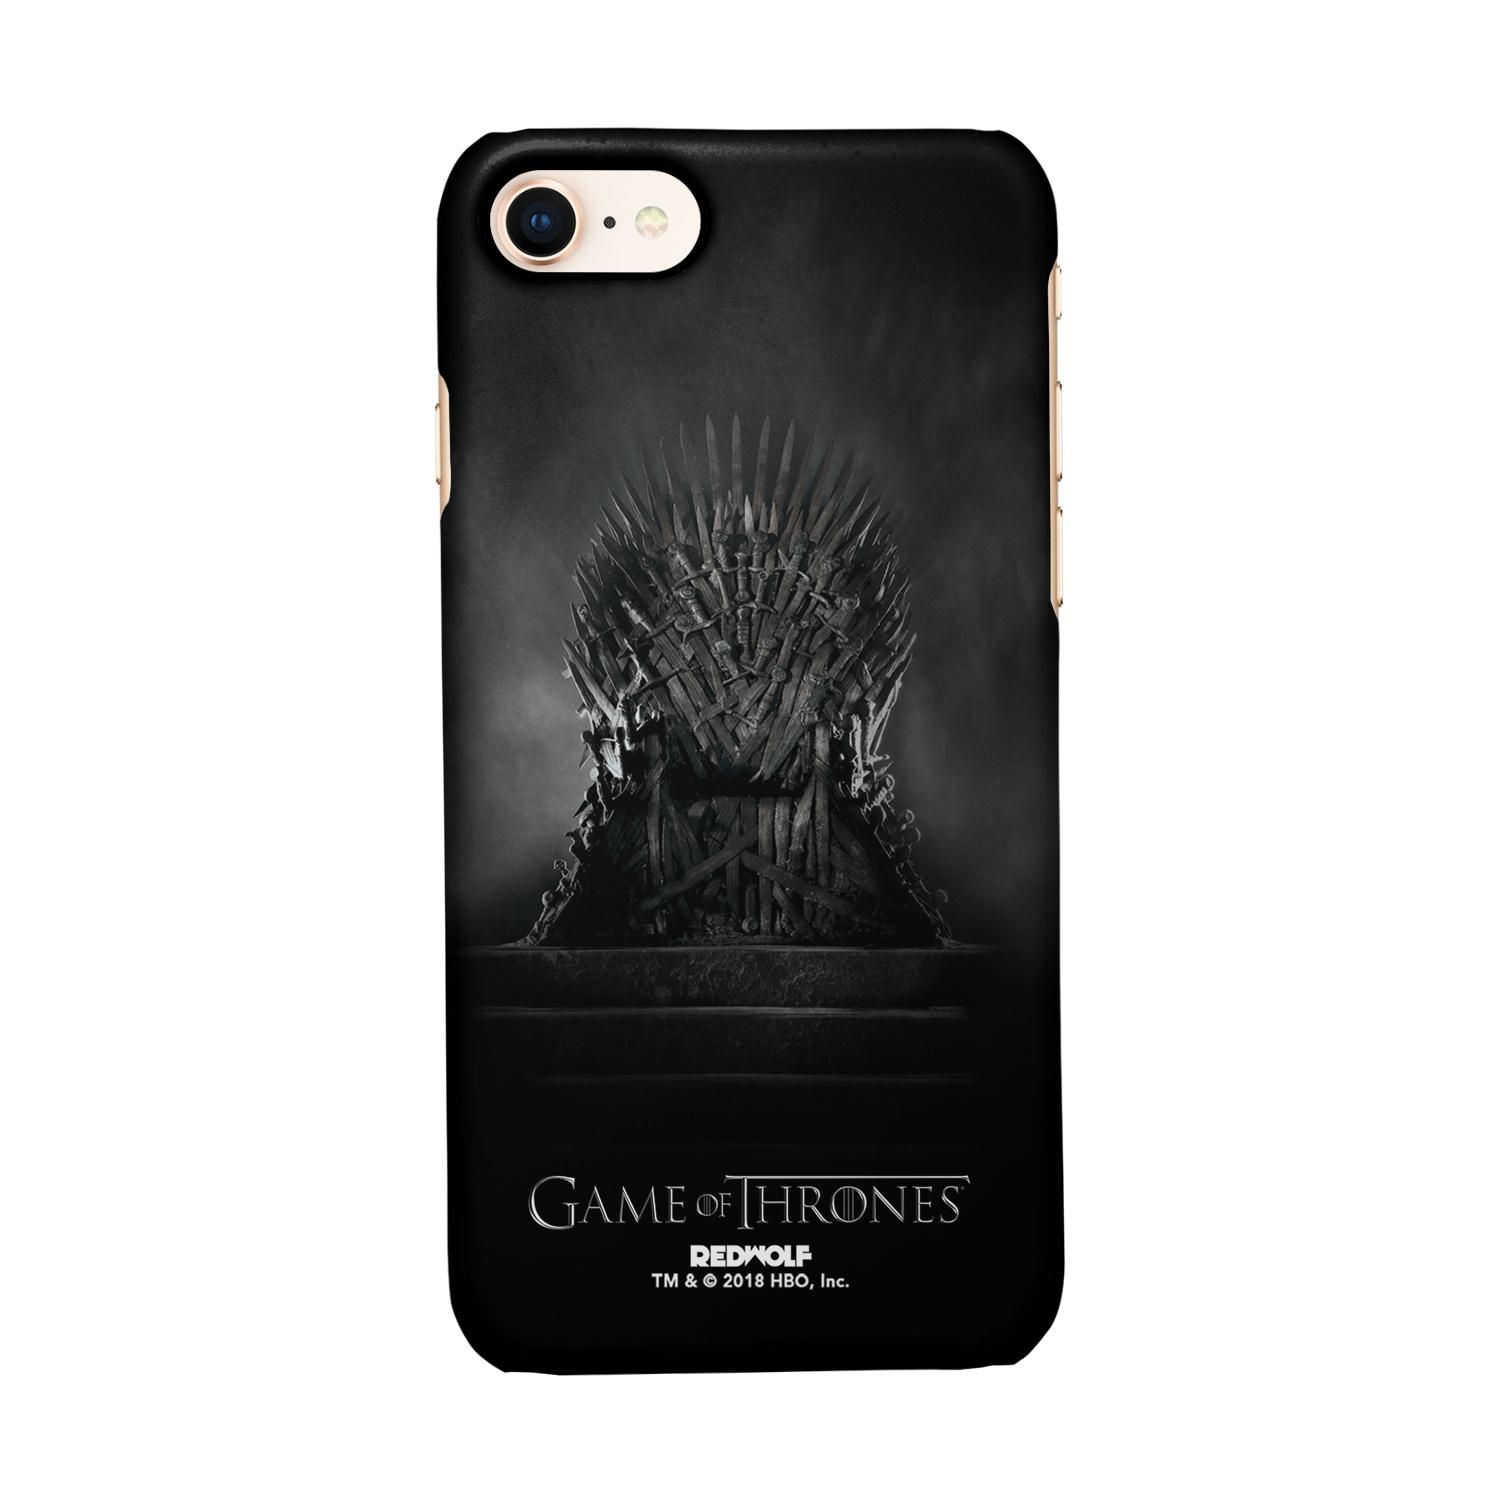 Buy The Throne - Sleek Phone Case for iPhone 7 Online